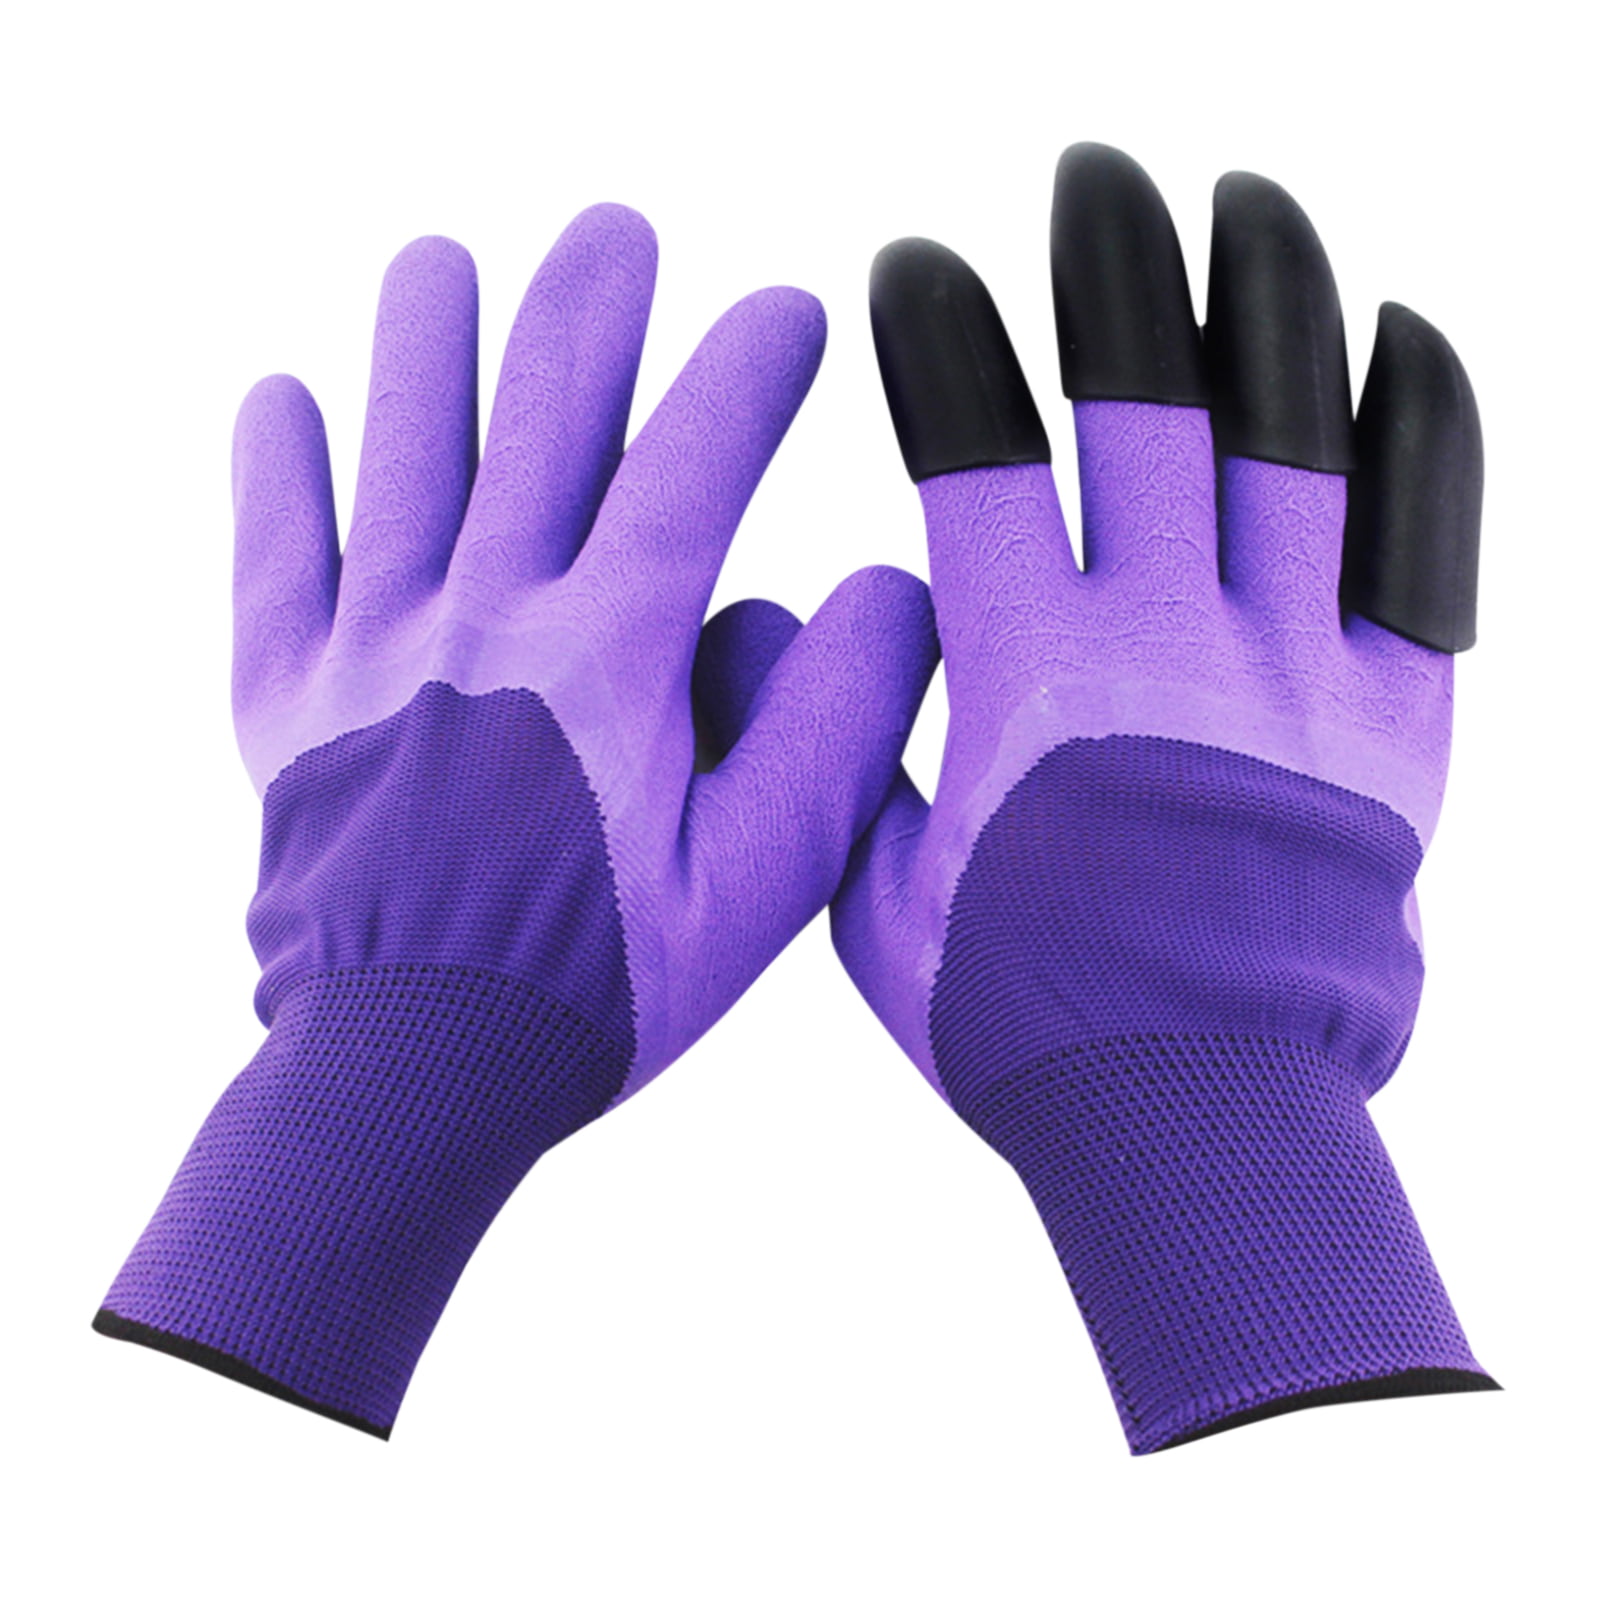 1 pcs Plastic Claws Planting Gloves Gardening Excavation Hands Protective 